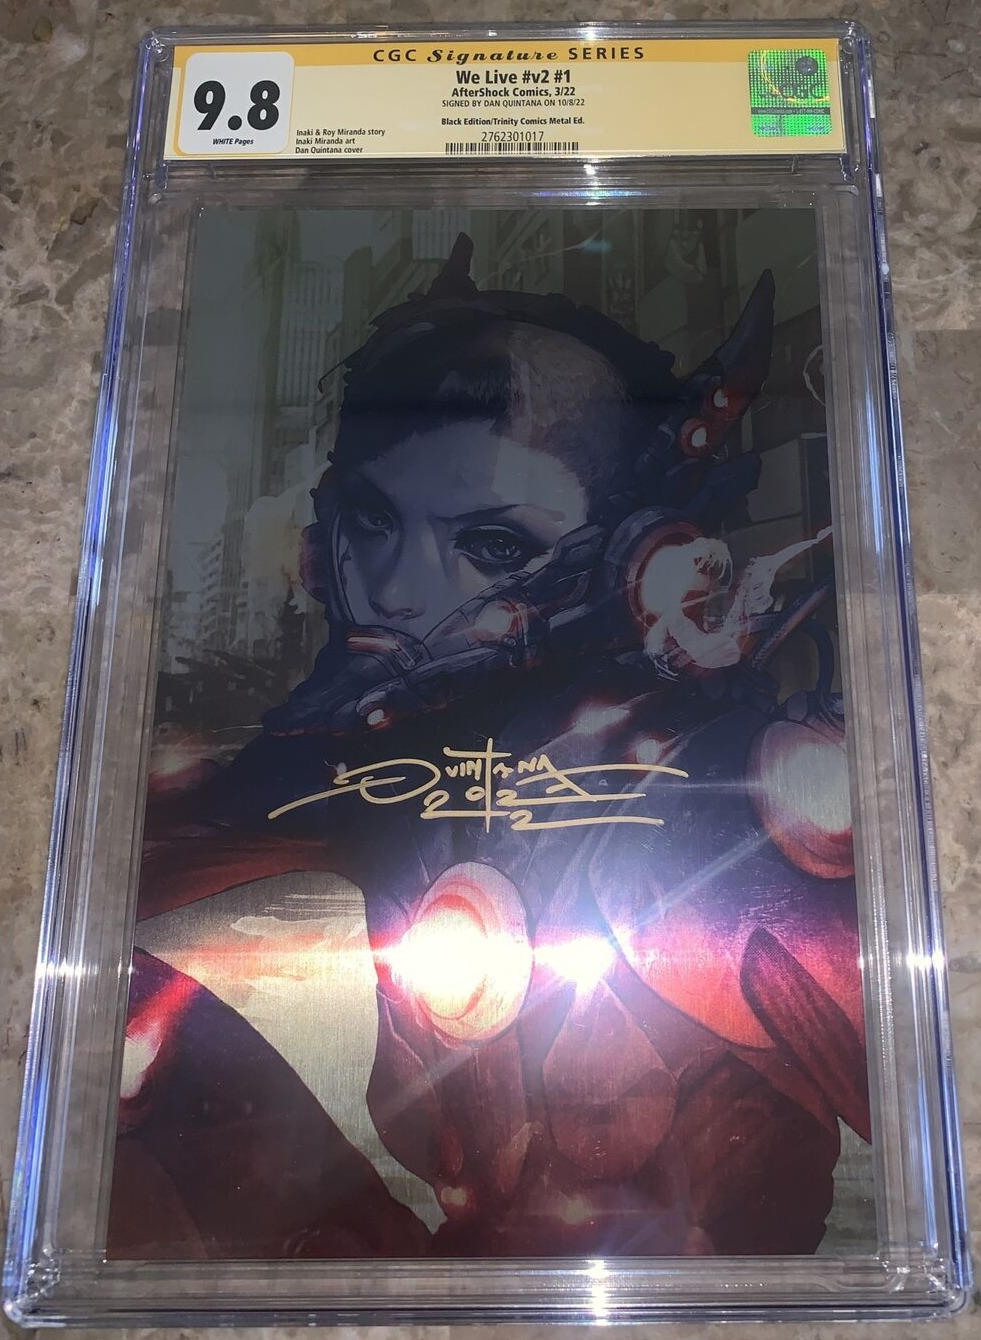 We Live #v2 #1 CGC 9.8 Black Metal Trinity excl. Quintana Signed Limited to 75